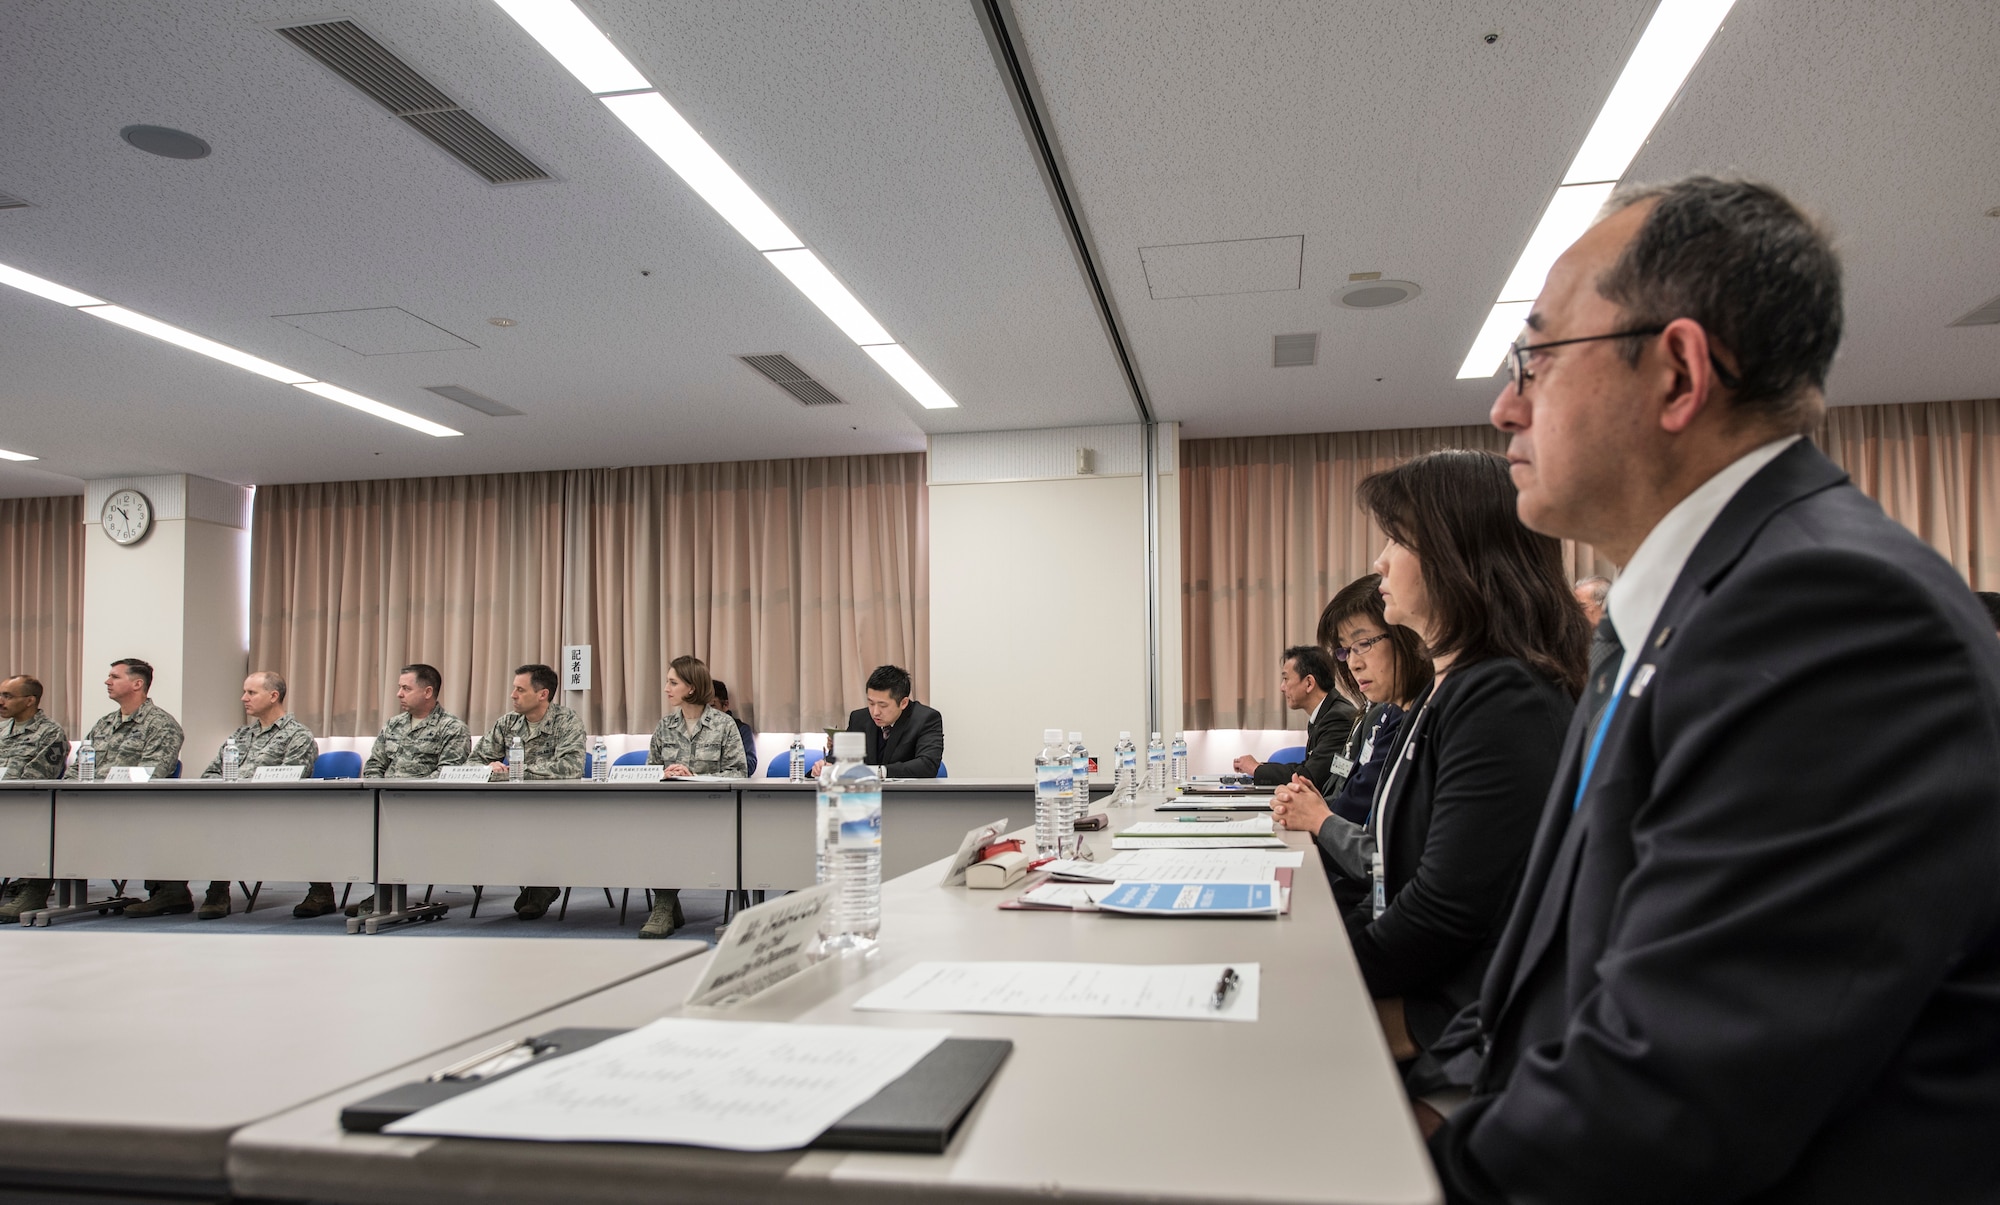 Misawa council members and 35th Fighter Wing leadership listen during the annual Misawa Community Relations Advisory Council meeting at the Misawa International Center, Japan, Feb. 5, 2019.  The meeting members discussed programs that improve the community and bilateral relations. (U.S. Air Force photo by Branden Yamada)